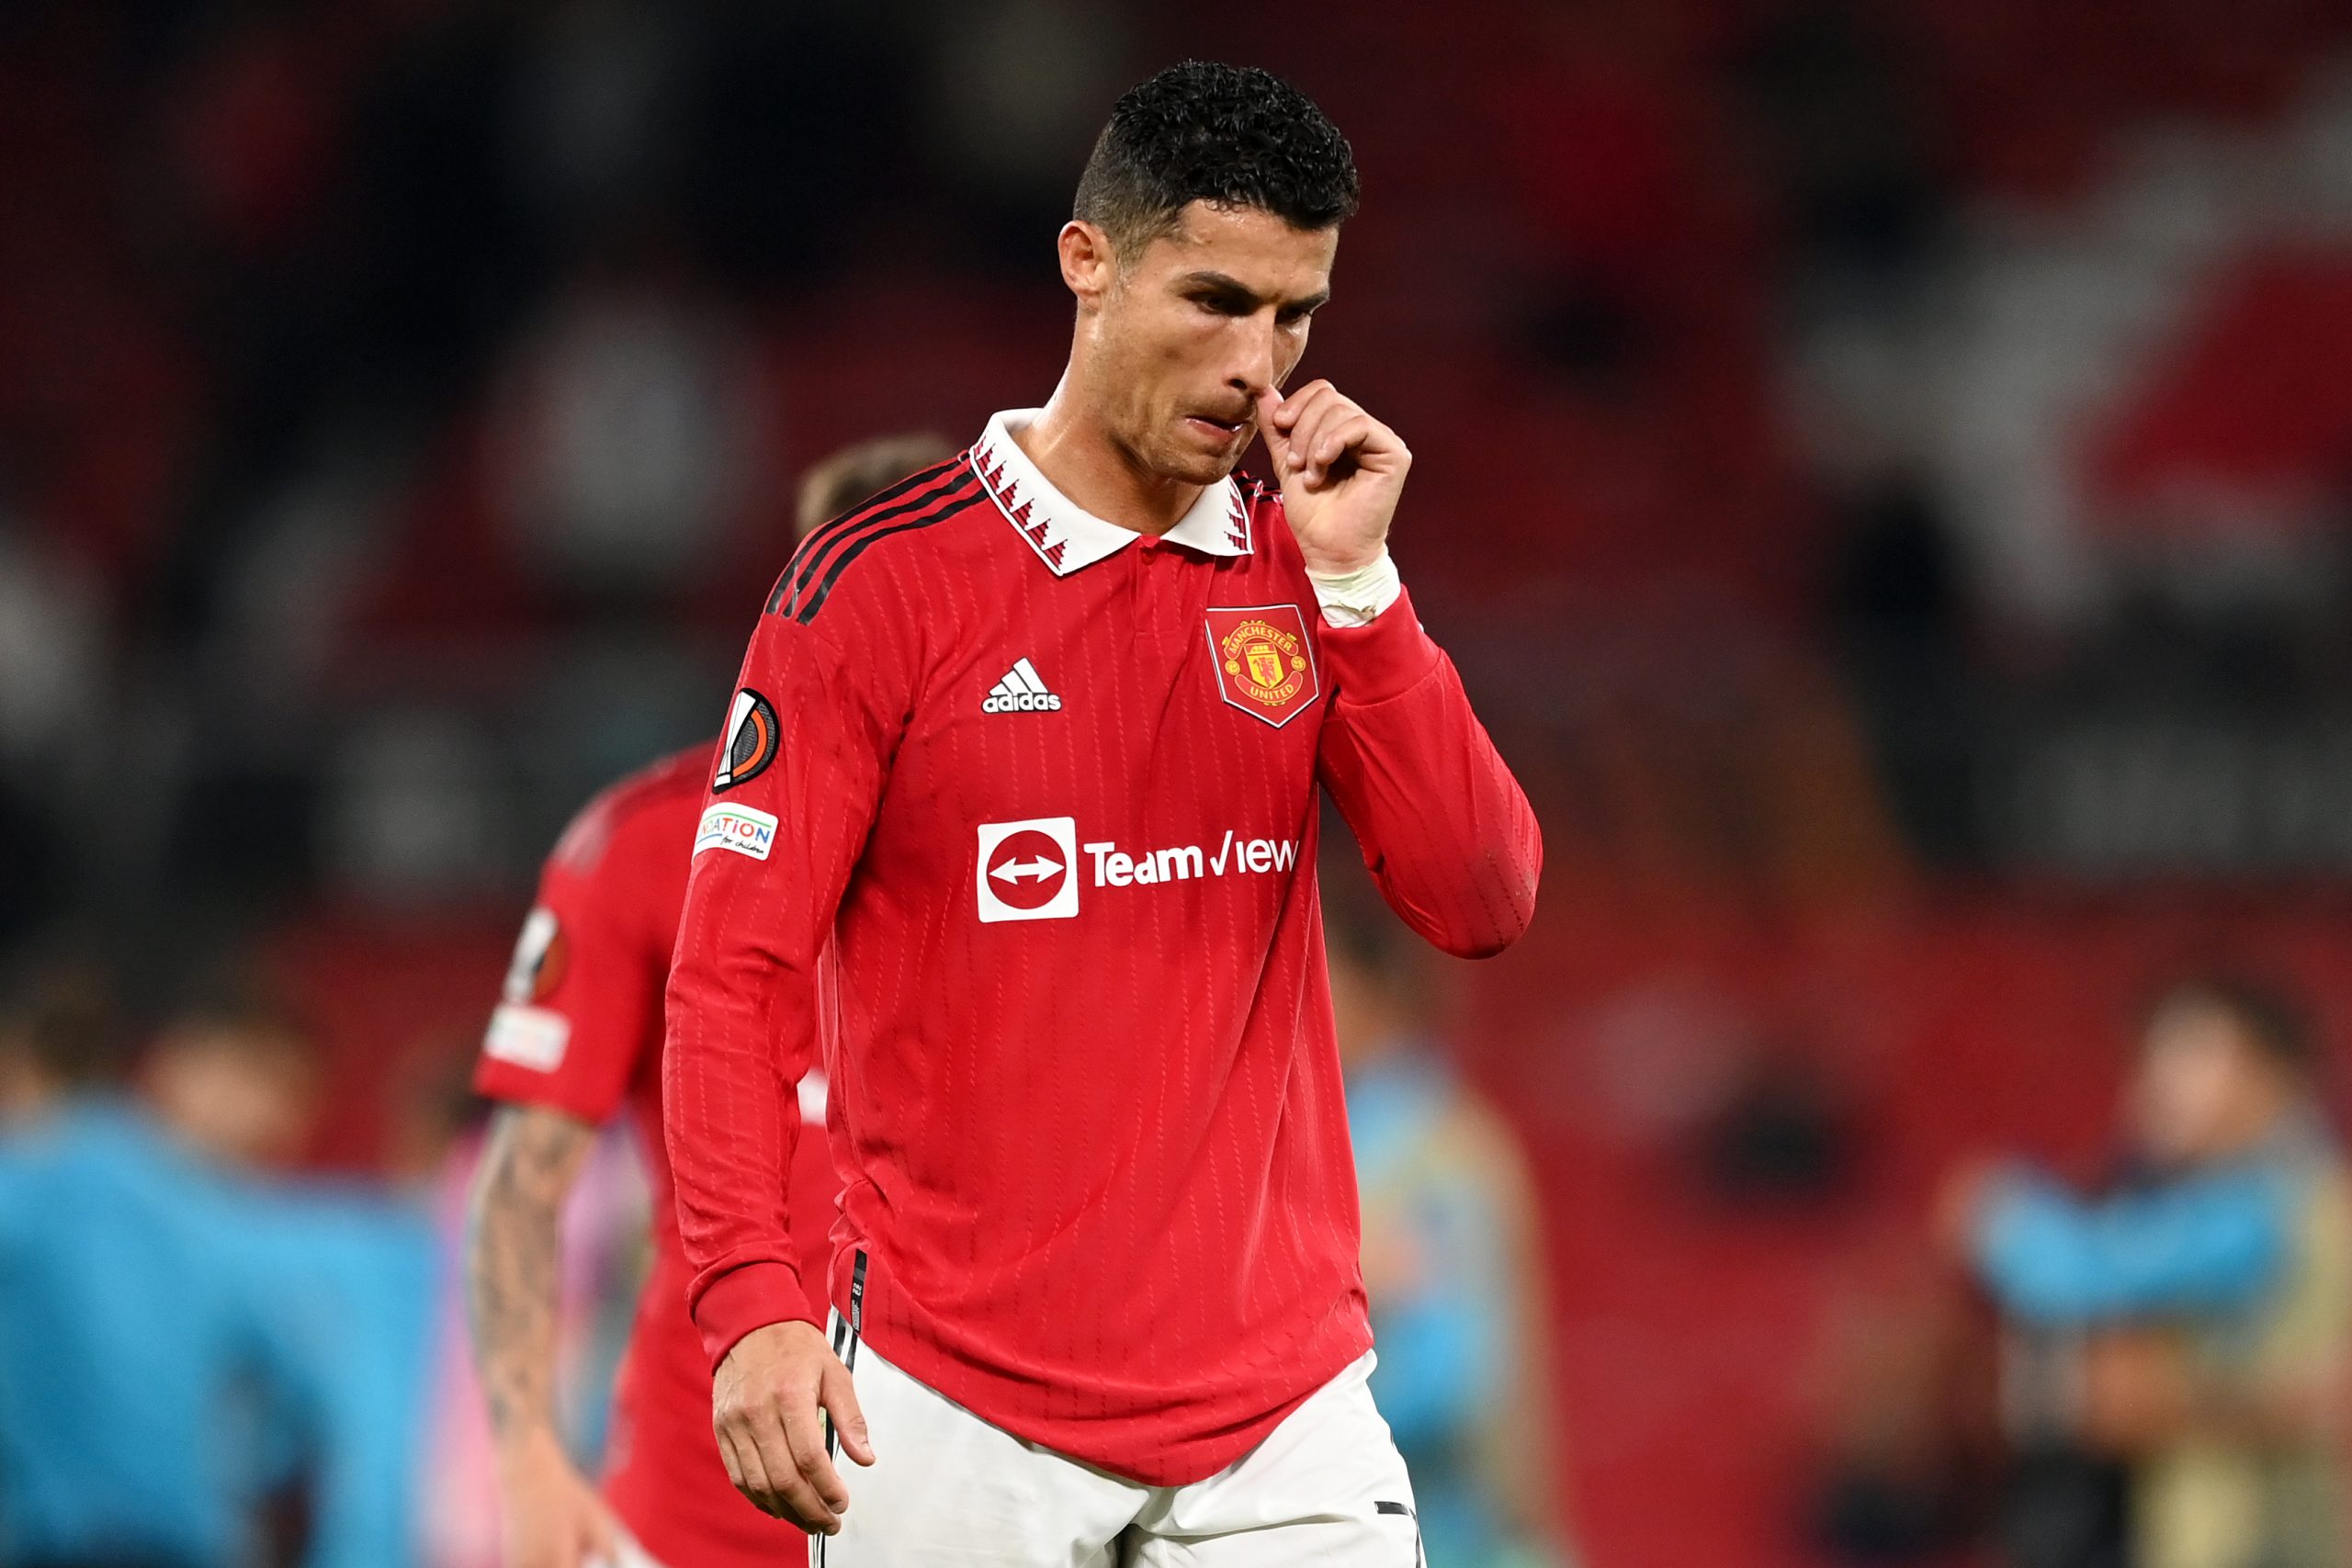 Wes Brown feels Manchester United superstar Cristiano Ronaldo would consider a January exit.